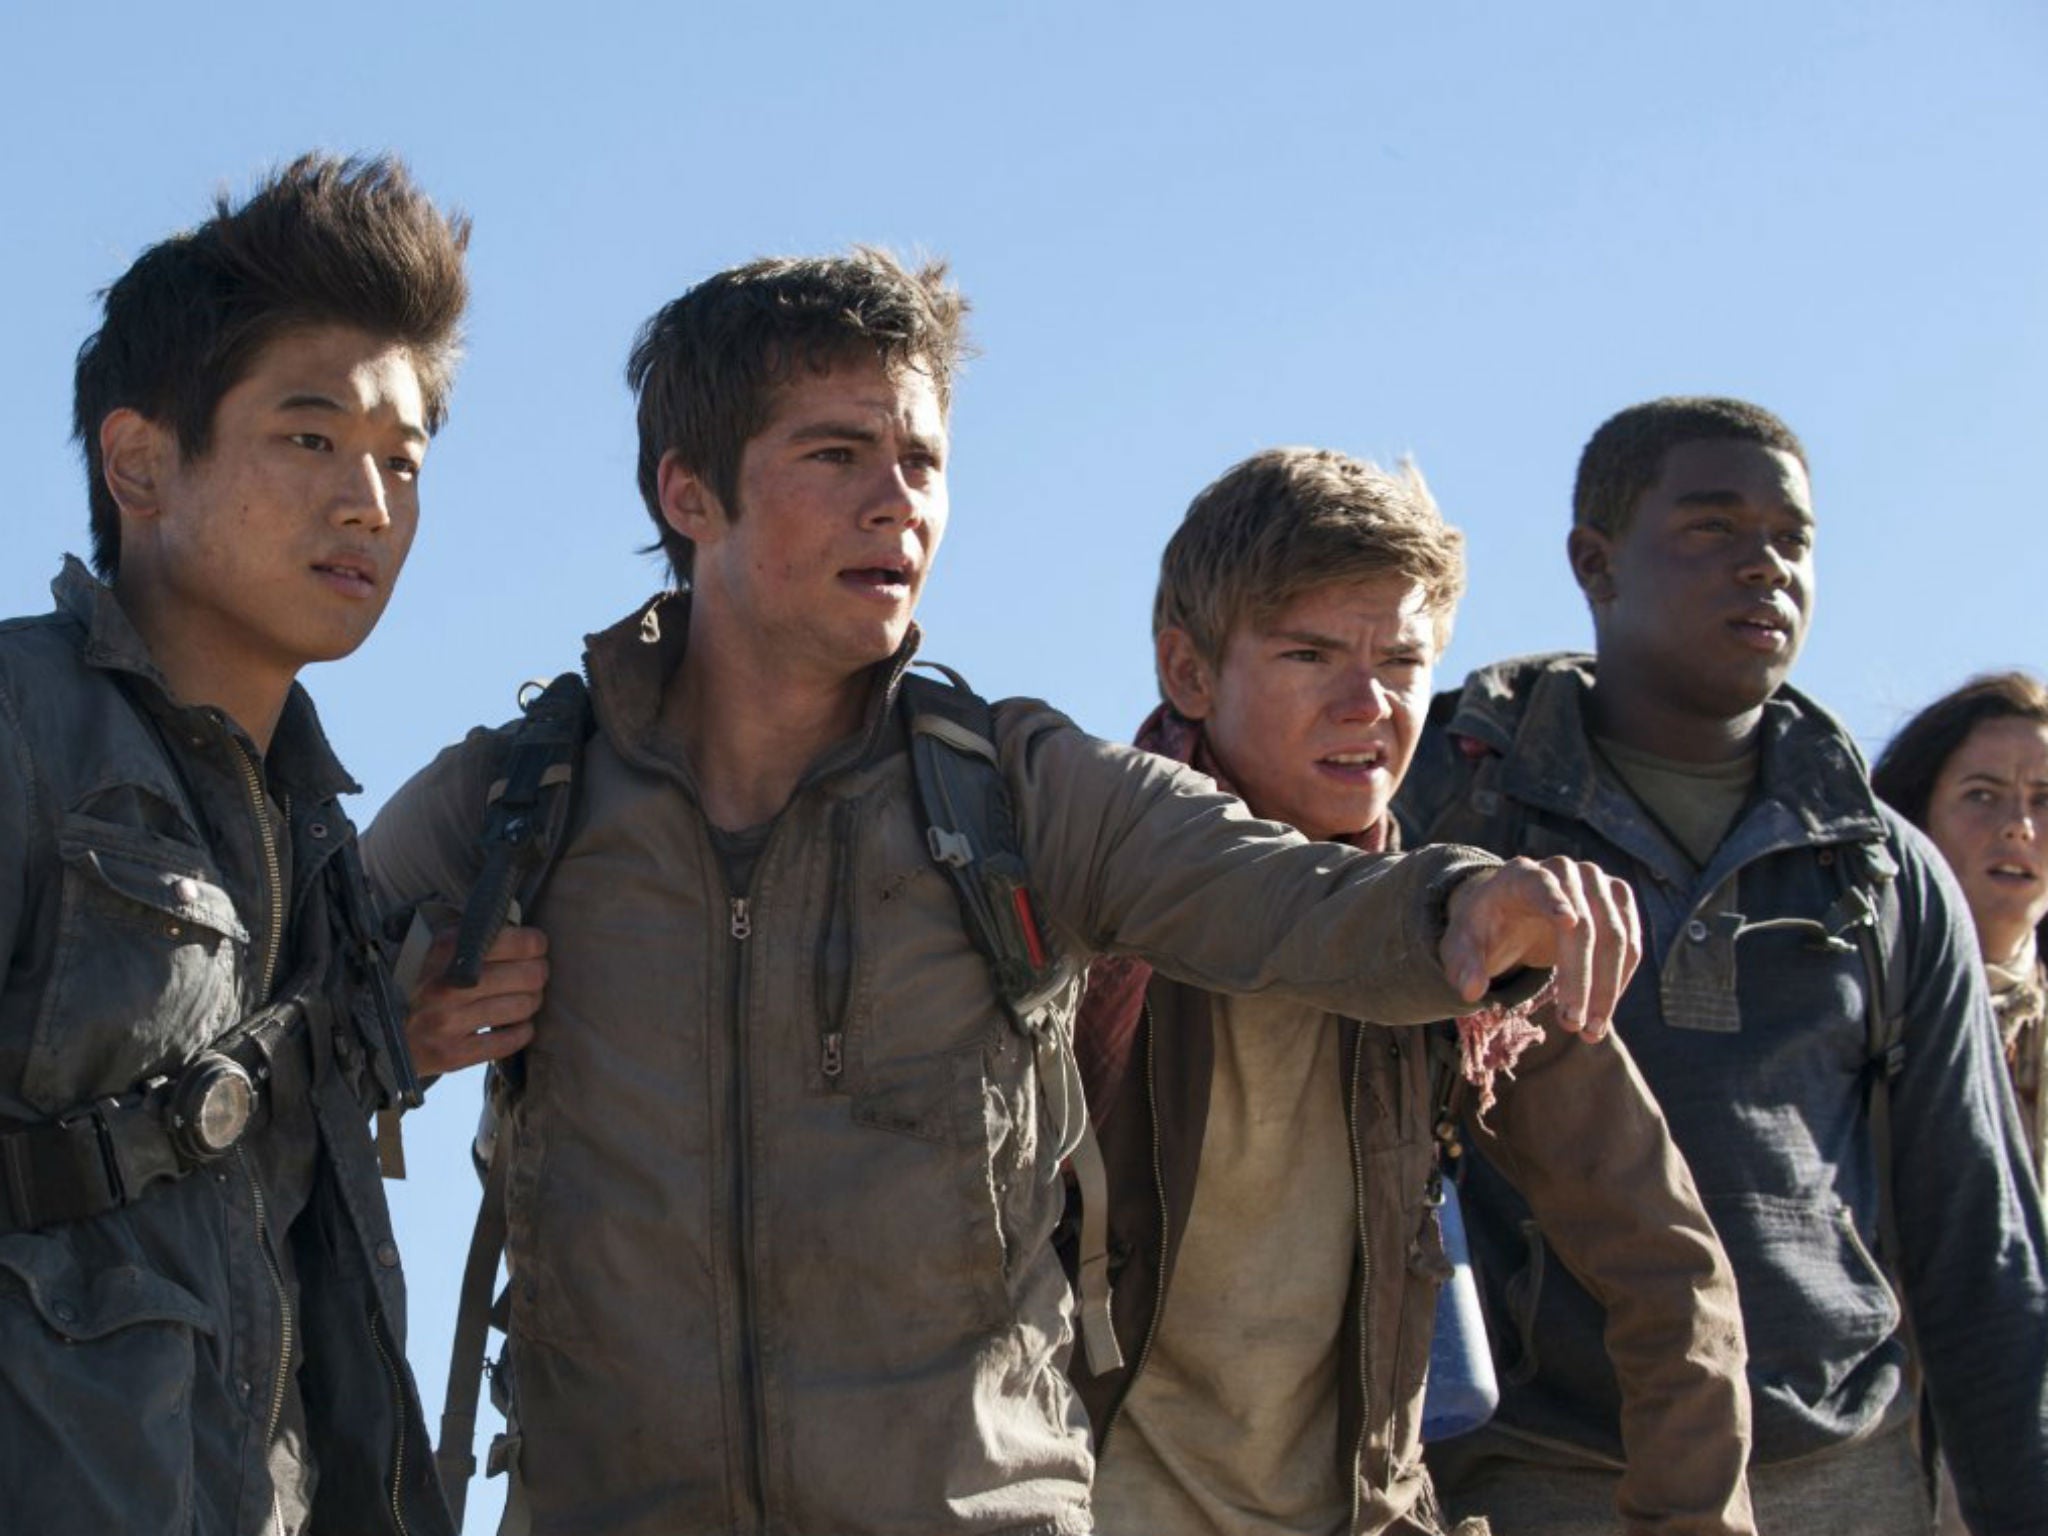 Game of Thrones star blamed for Maze Runner: The Scorch Trials